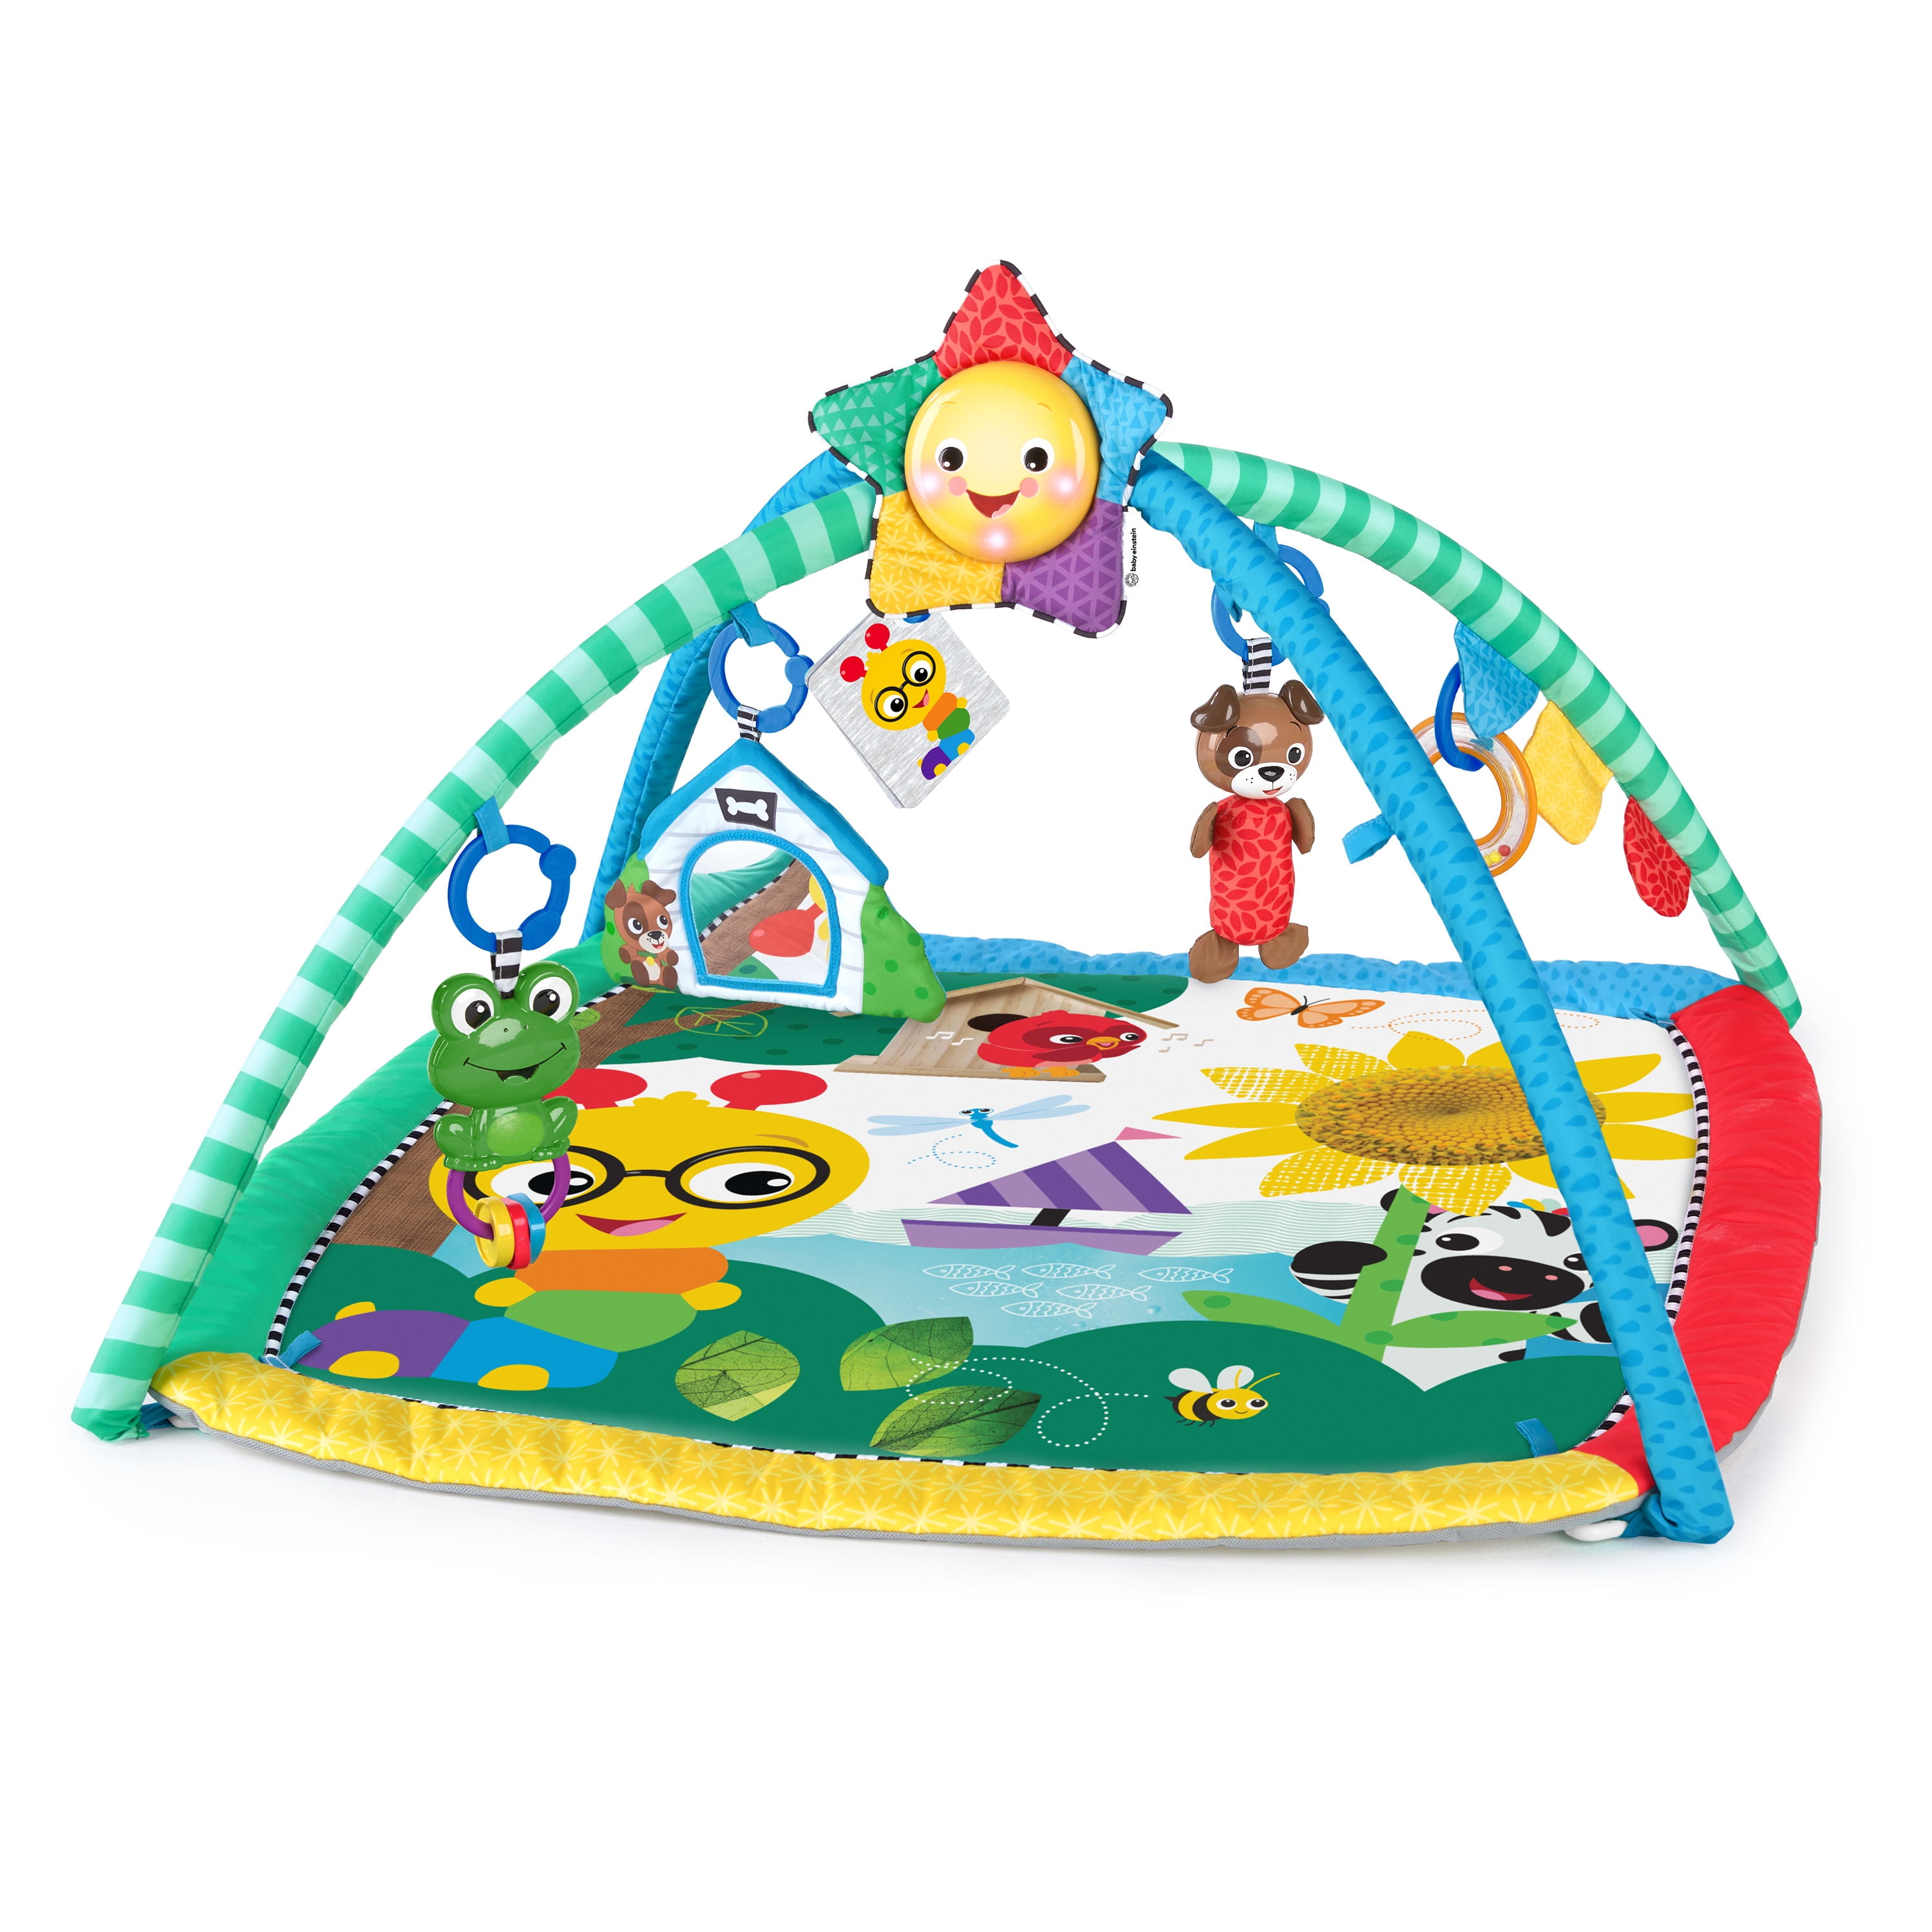 Baby Play Mat Elephant Playgym Acitivity Gym 67x60x48cm Gift for Babies K009 